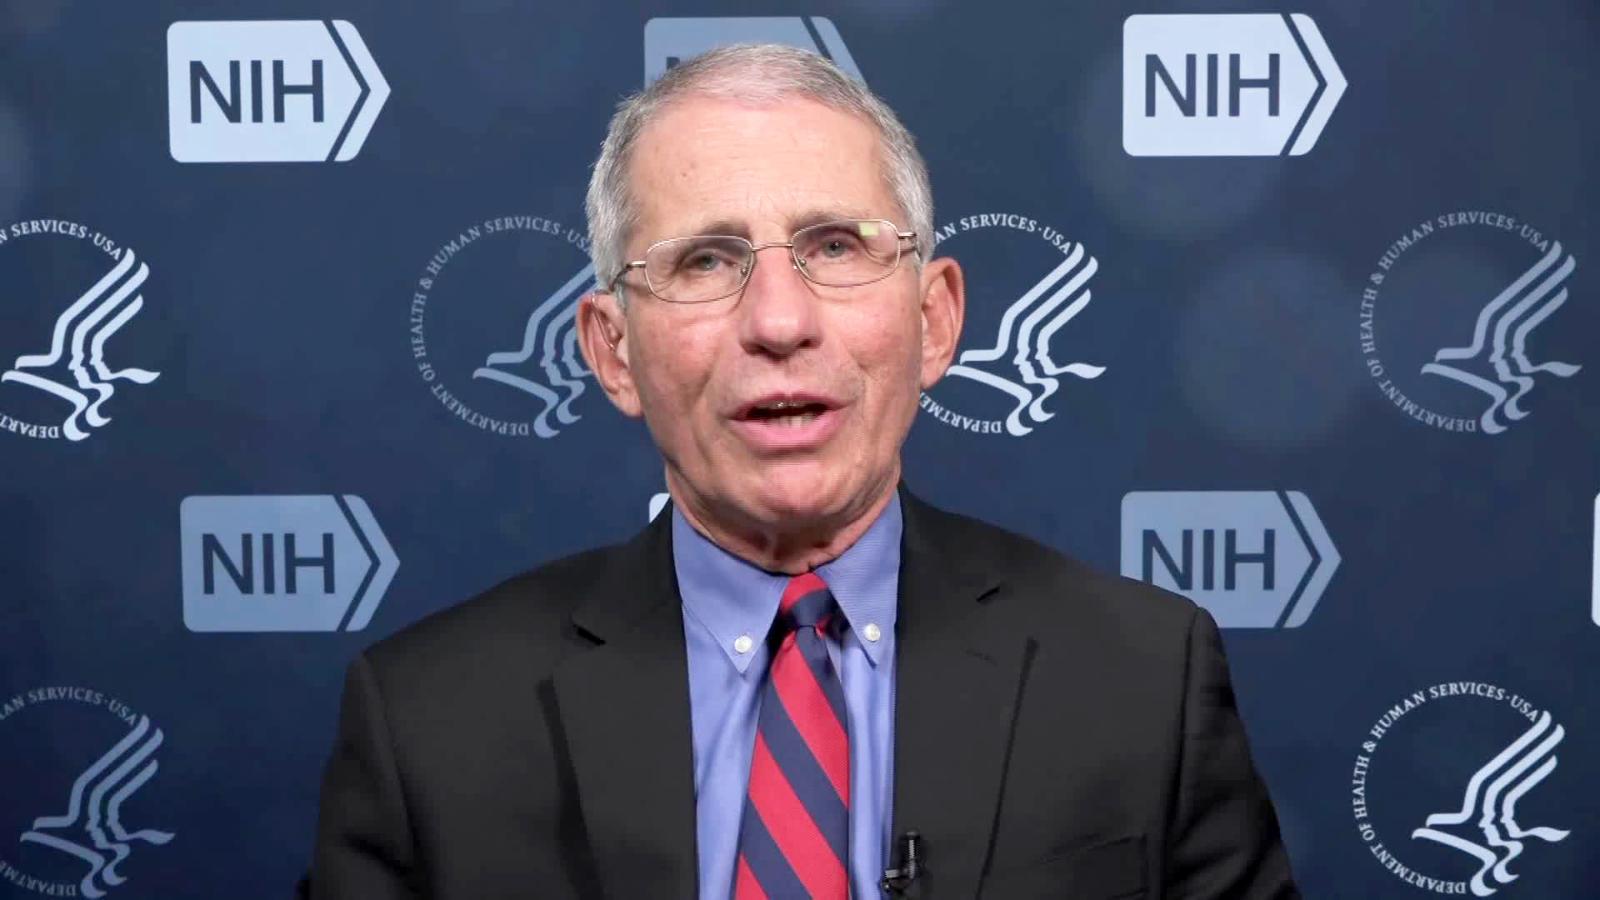 Dr. Anthony Fauci explains why he stays optimistic during outbreak